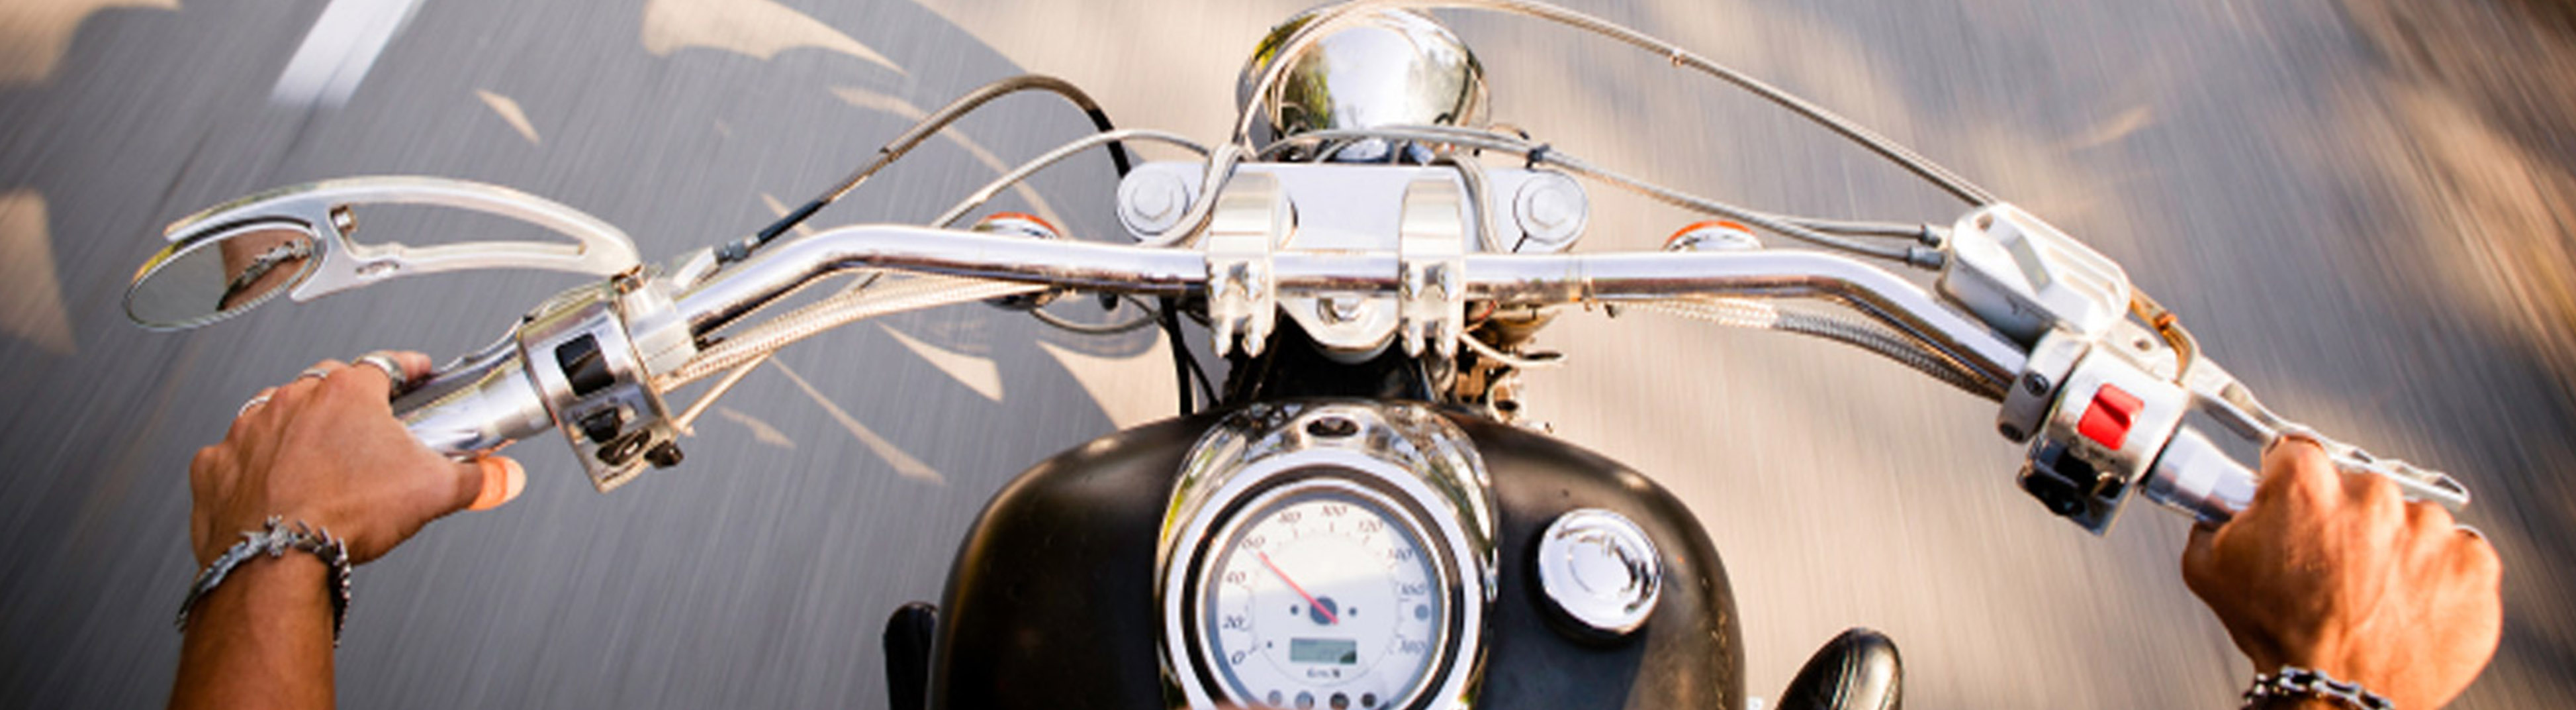 New York Motorcycle insurance coverage